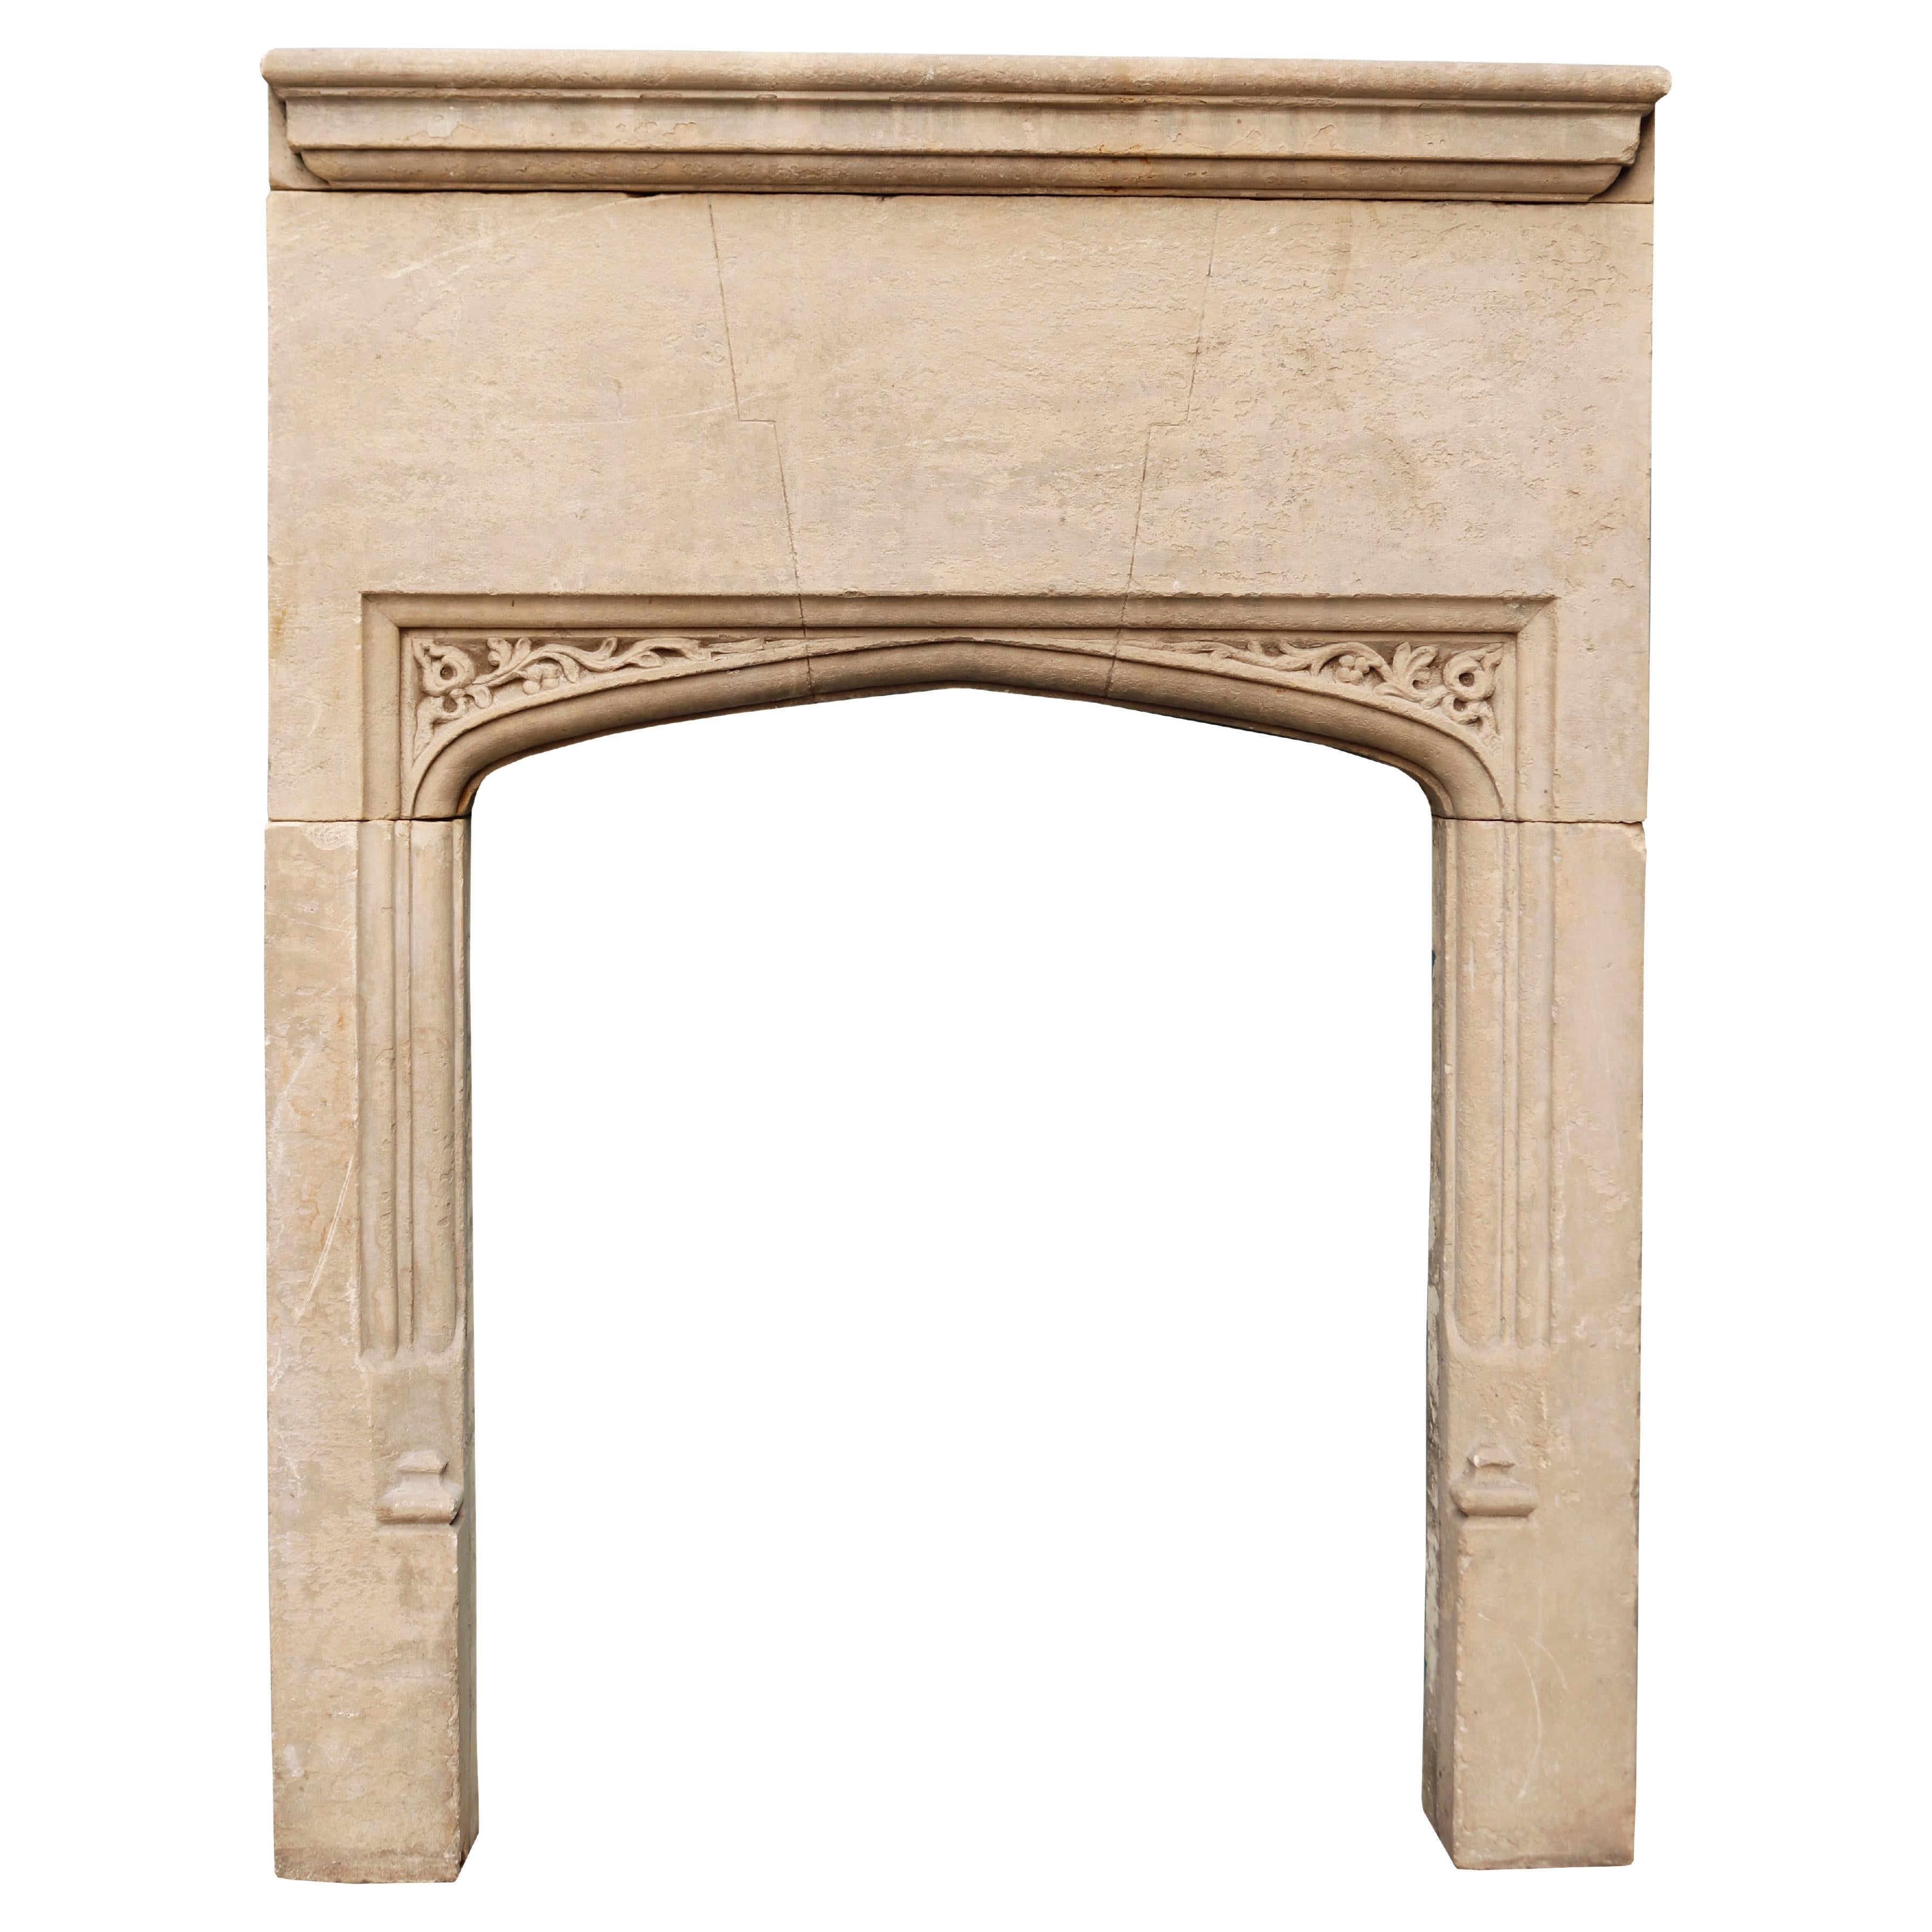 Antique Carved Limestone Fireplace Mantel For Sale